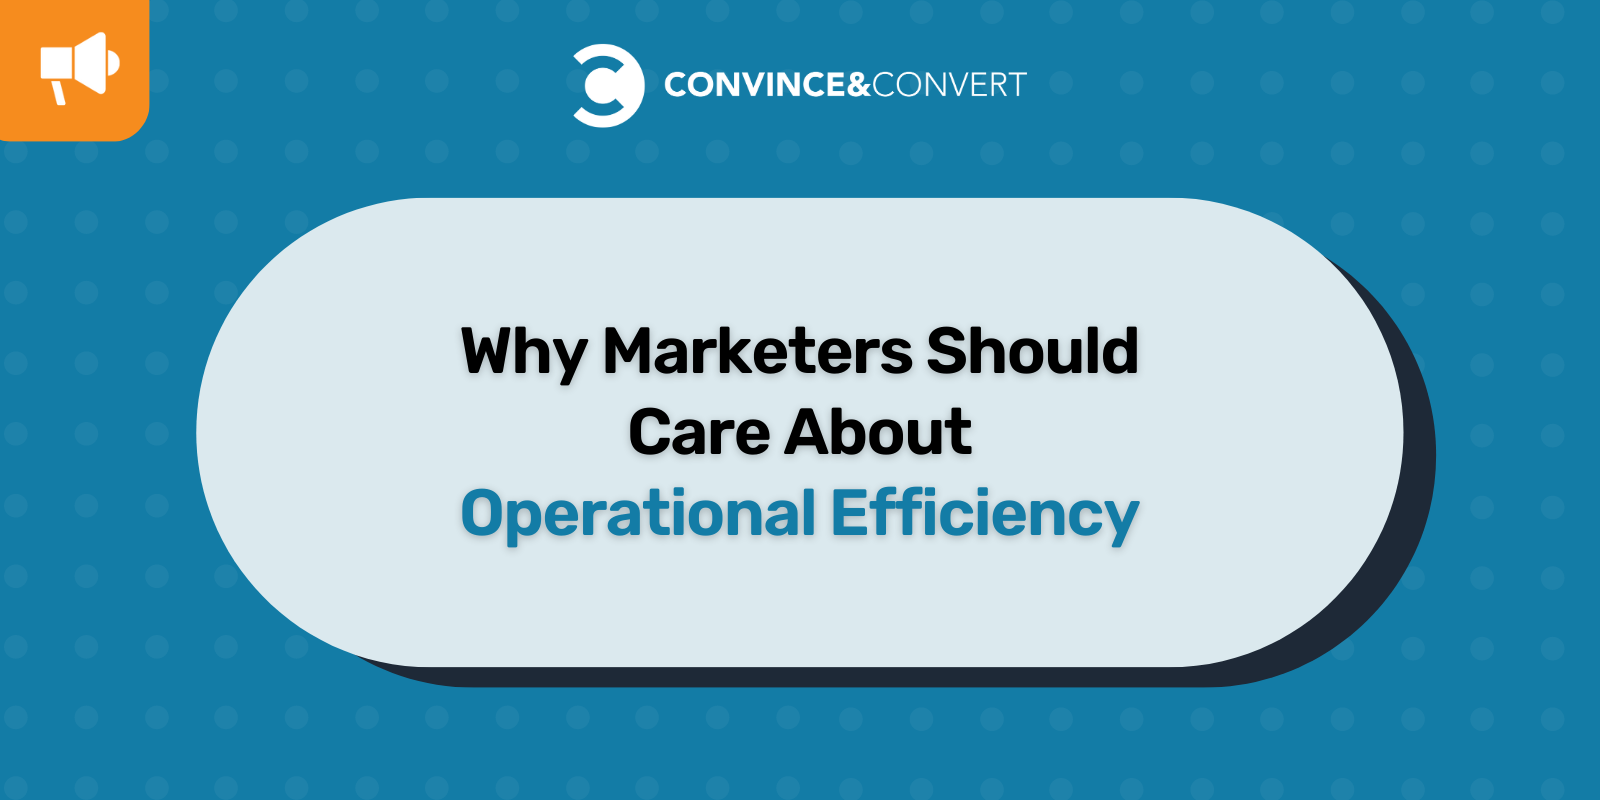 Why Marketers Should Care About Operational Efficiency